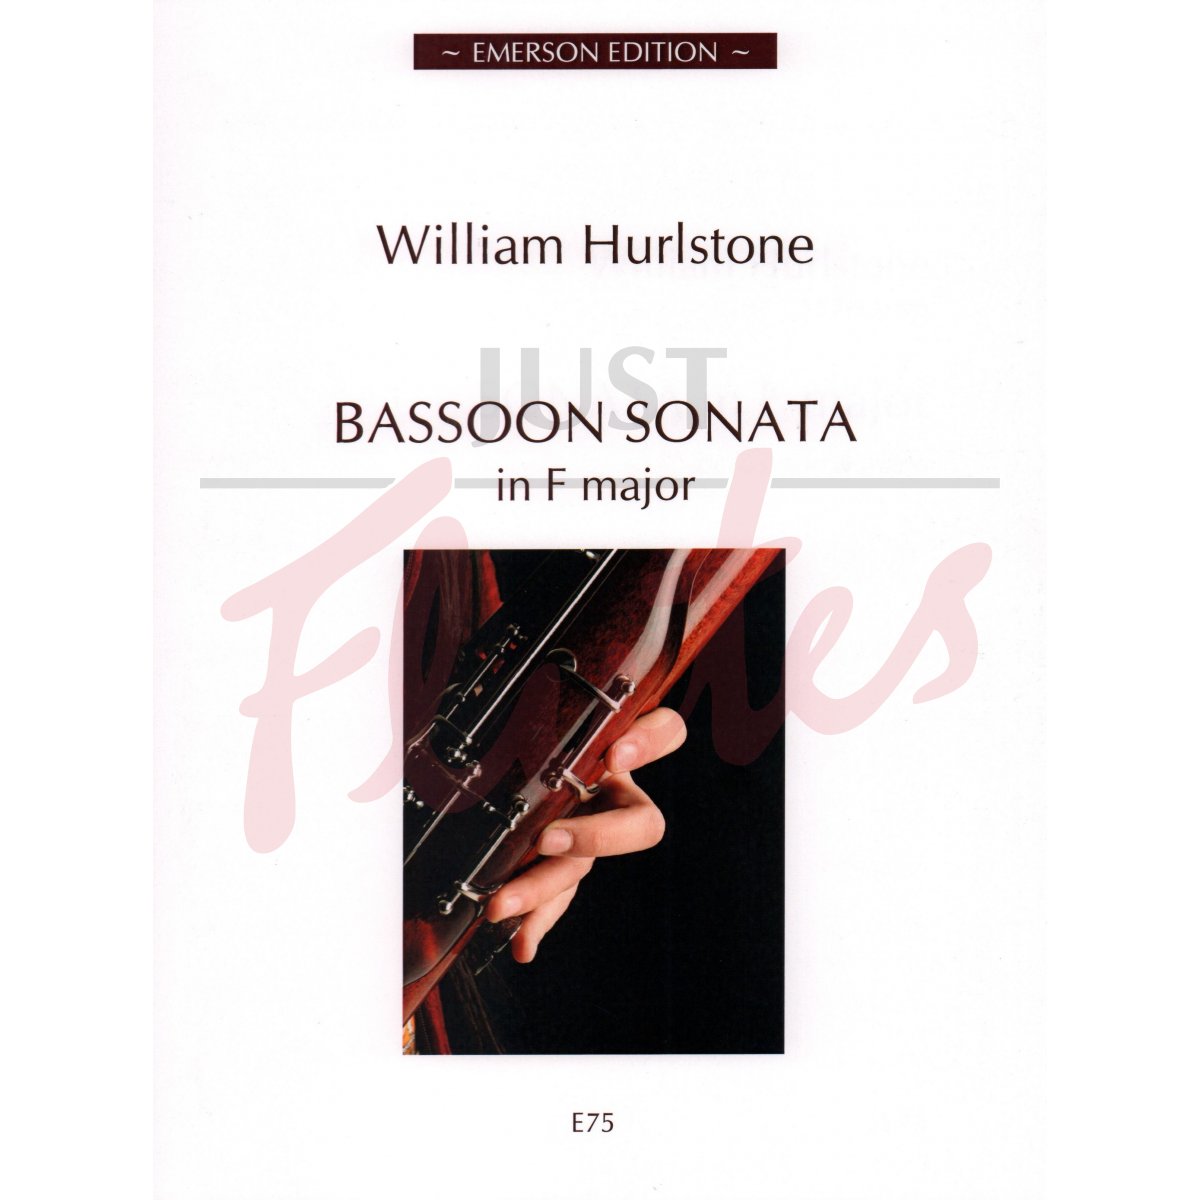 Sonata in F major for Bassoon and Piano